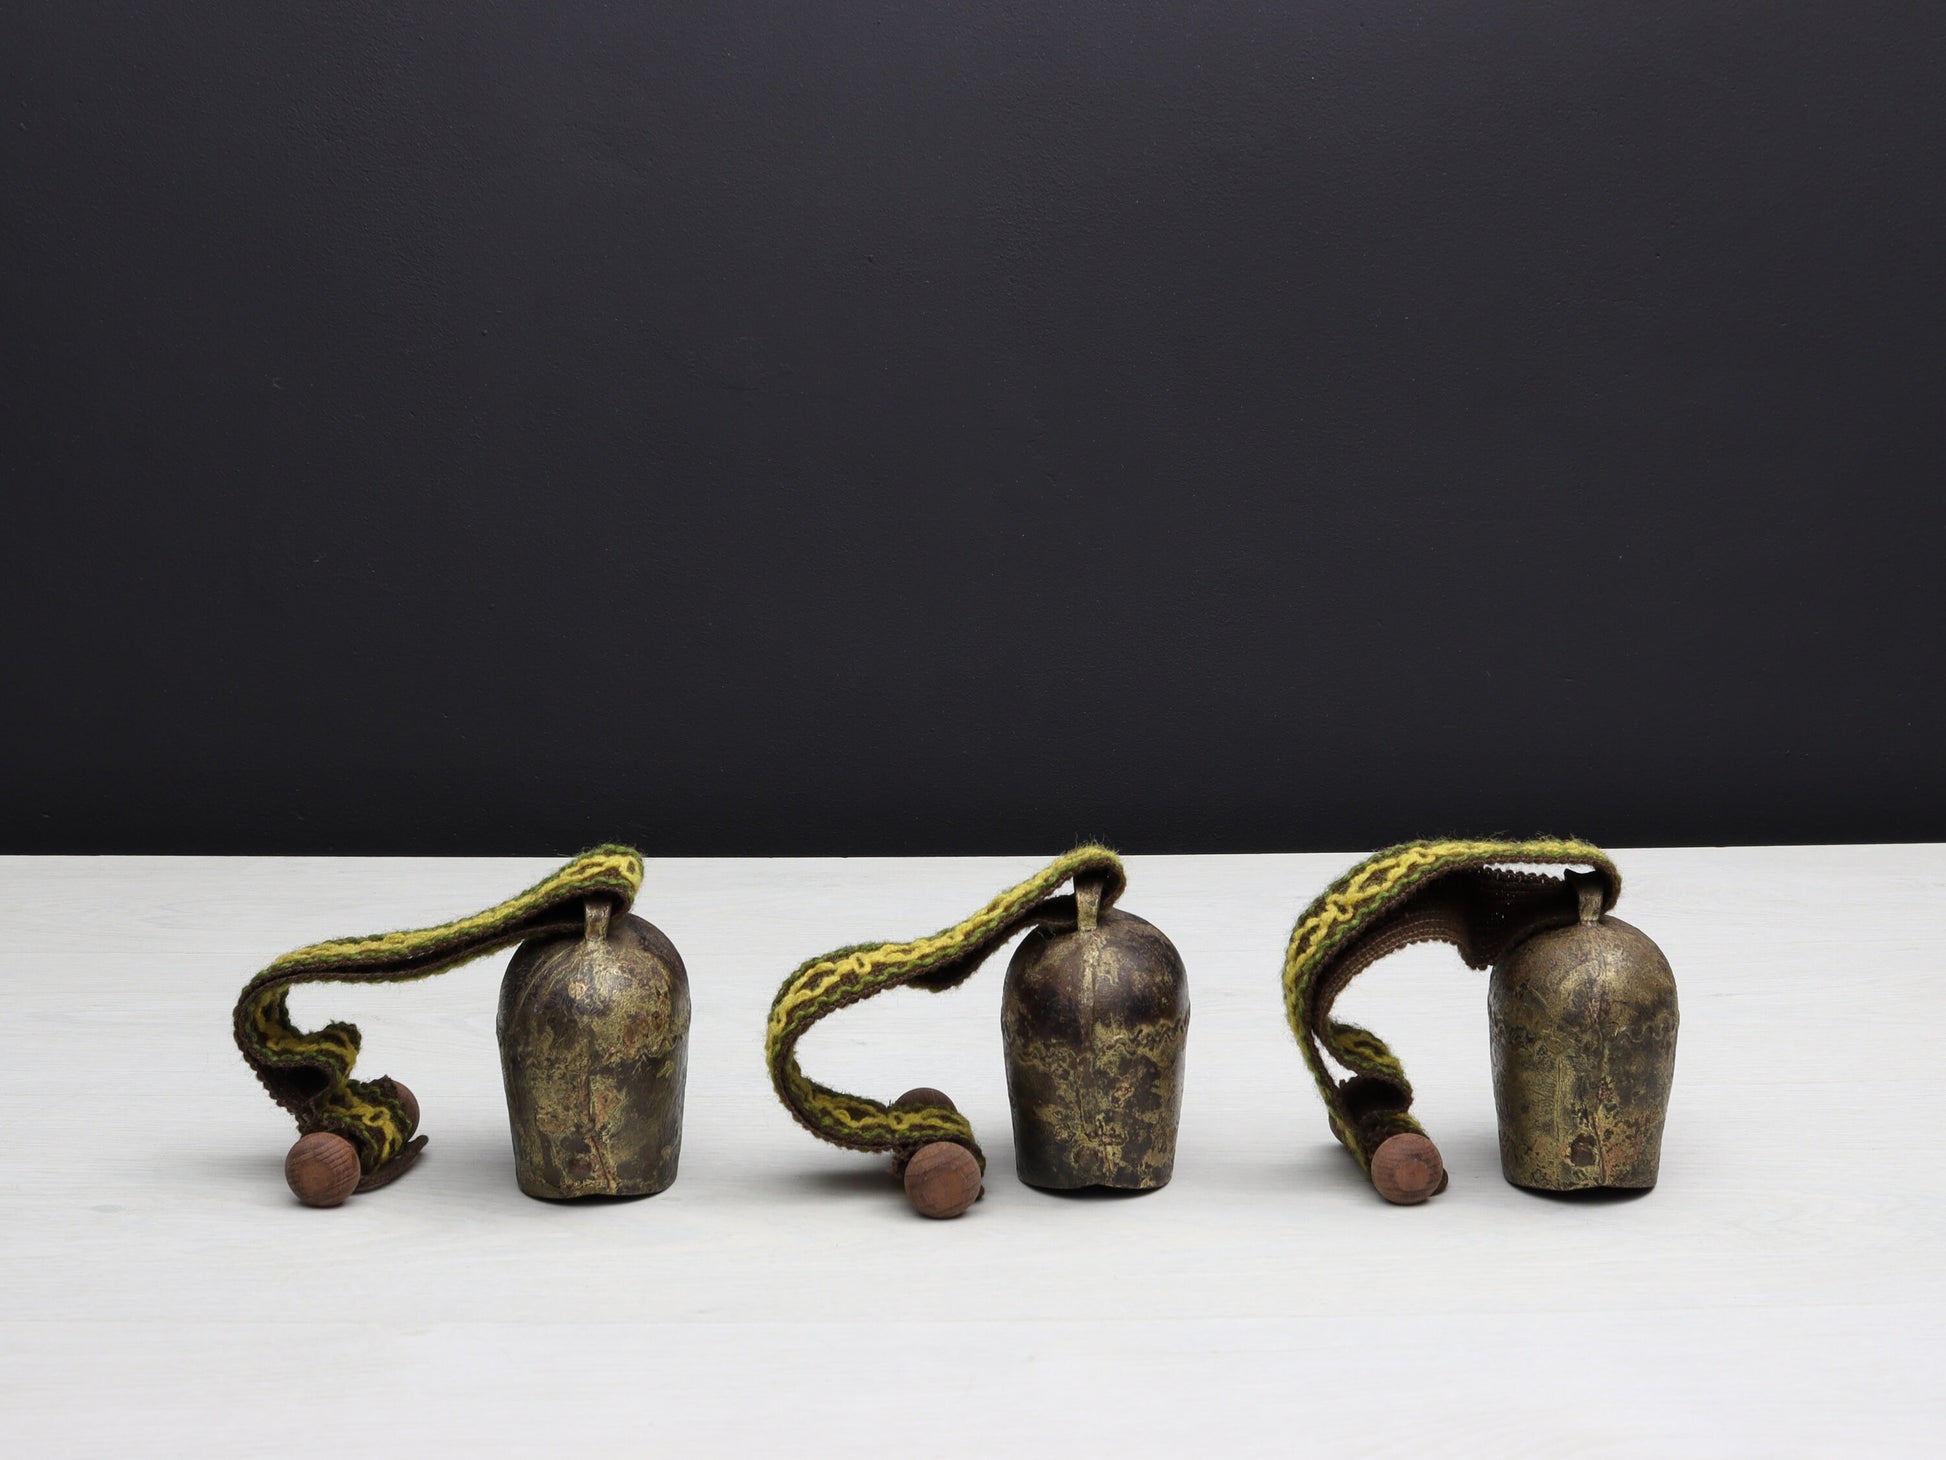 Charming Vintage bells from Europe